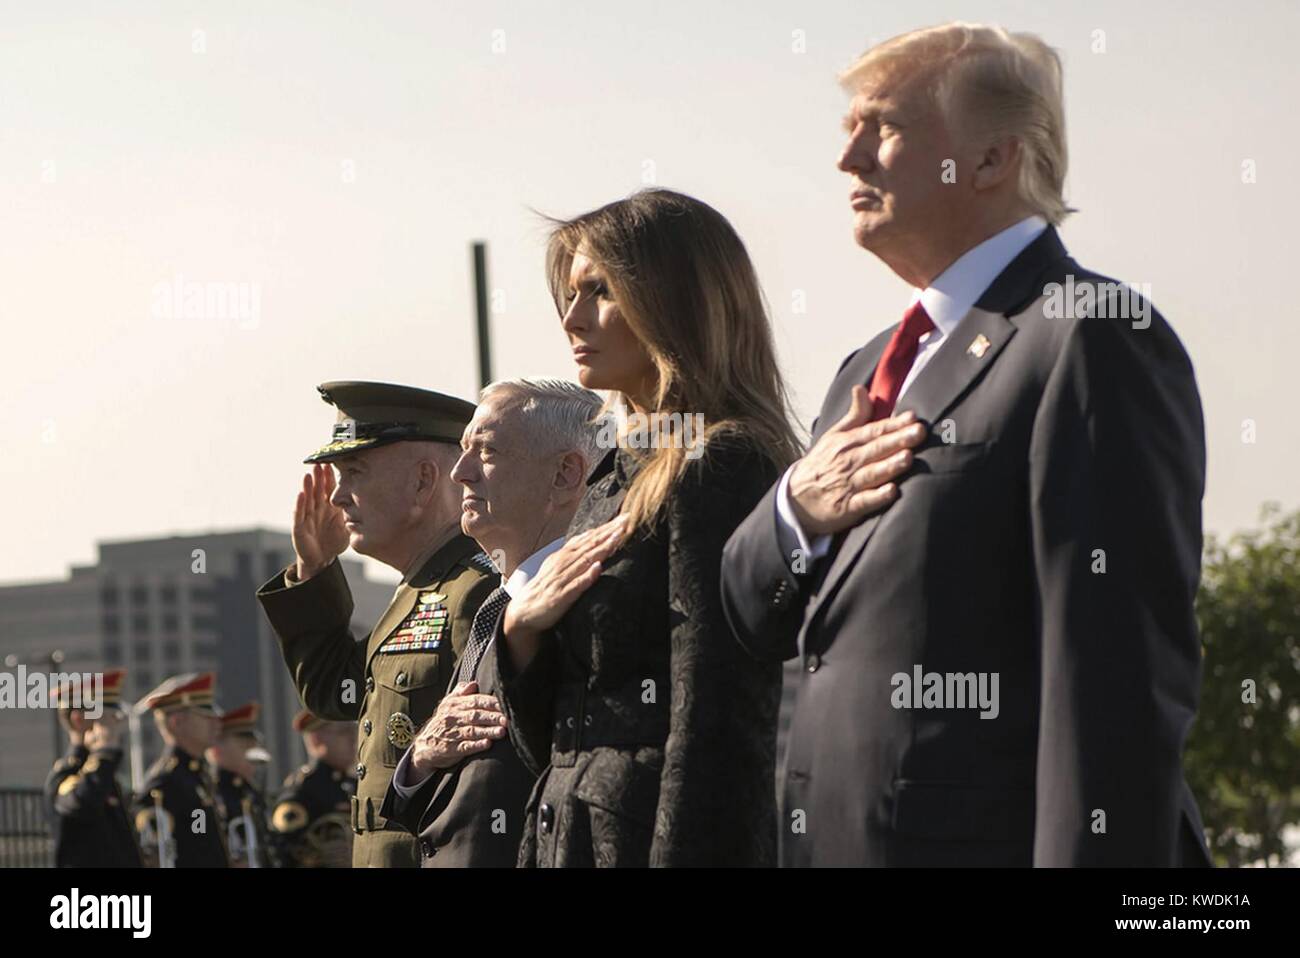 President Trump during the 9/11 Observance Ceremony at the Pentagon, Sept. 11, 2017. Standing in salute, R-L: President Donald Trump, First Lady Melania Trump, Defense Sec. Jim Mattis, Gen. Joe Dunford, Chmn., Joint Chiefs of Staff (BSLOC 2017 18 145) Stock Photo